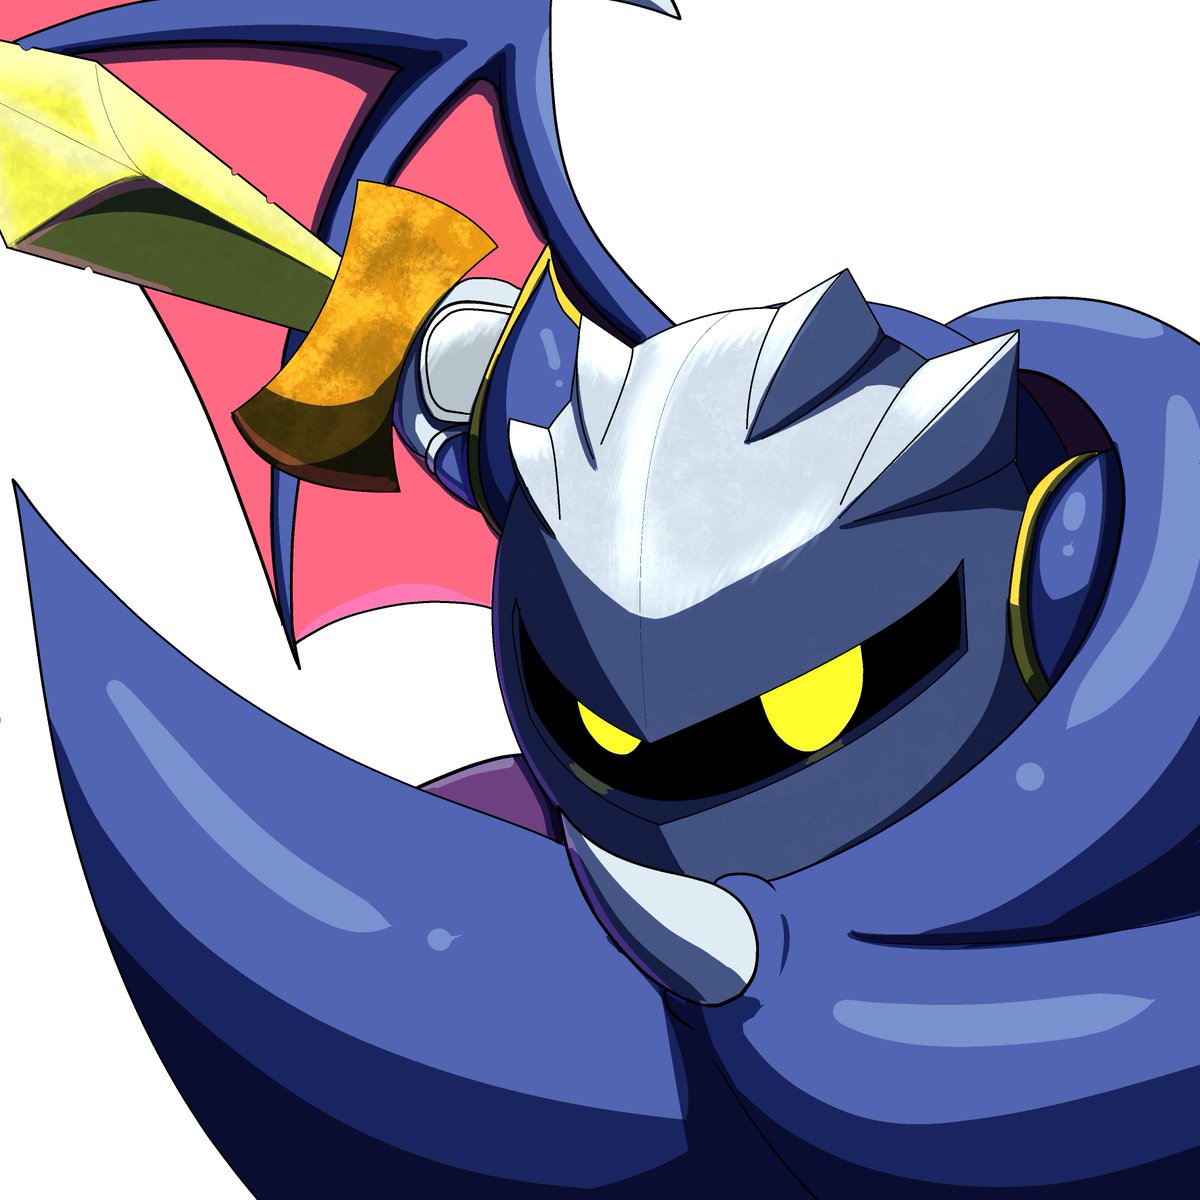 meta knight weapon sword yellow eyes armor wings white background mask  illustration images